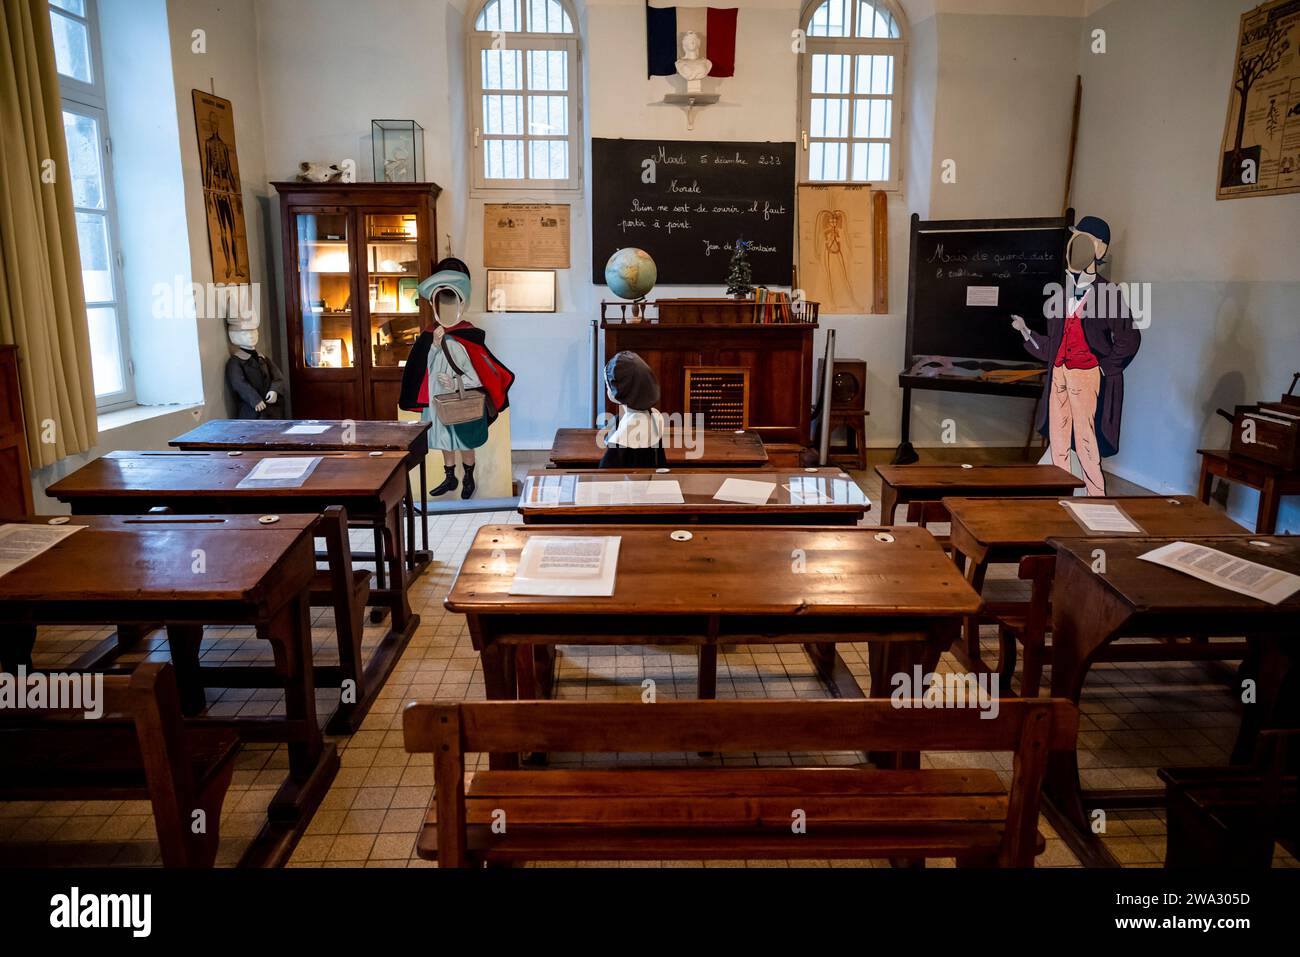 School Museum, a Museum featuring furniture, books & other artefacts used in French schools from 1880 to 1960, Carcassonne, France Stock Photo